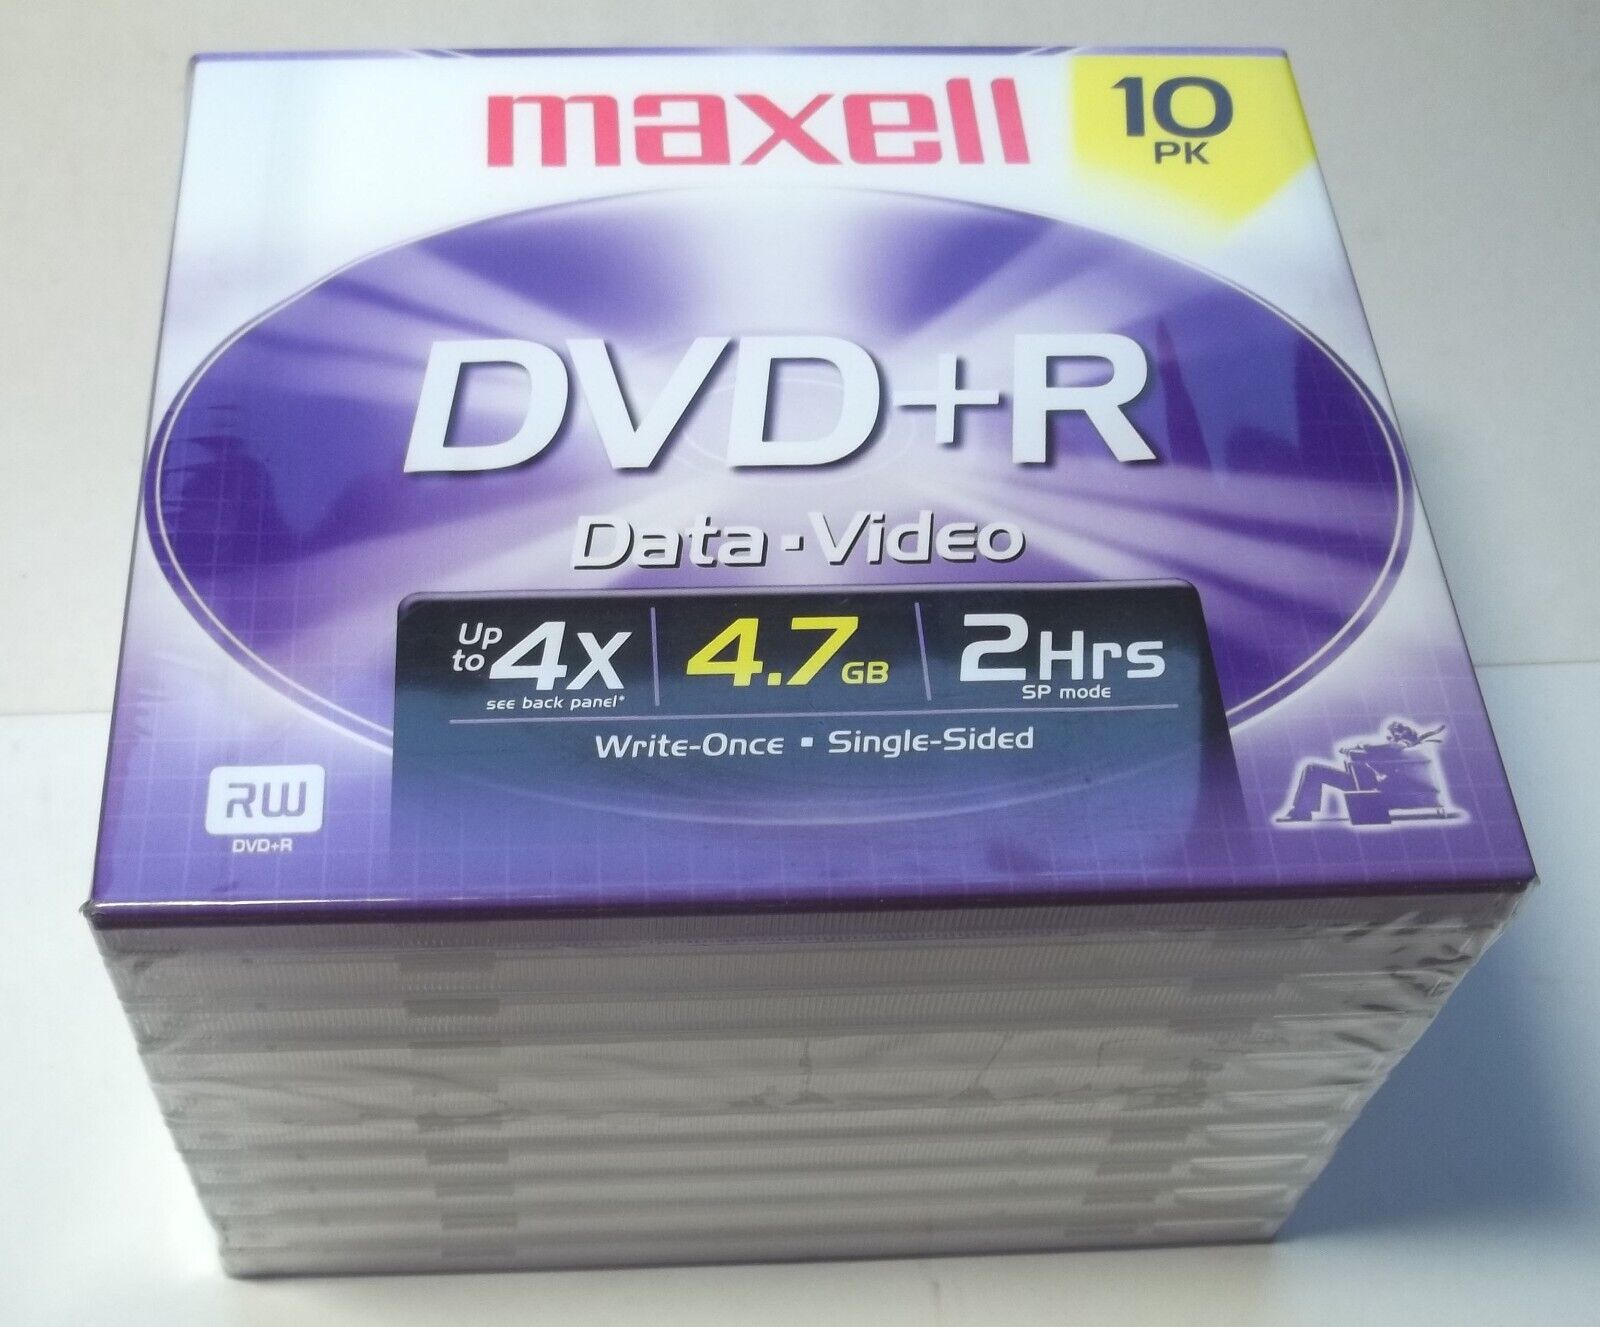 NOS Maxell DVD+R (DVD-R) 4.7GB Data/Video DVDs w/ Case - 10 Count Pack